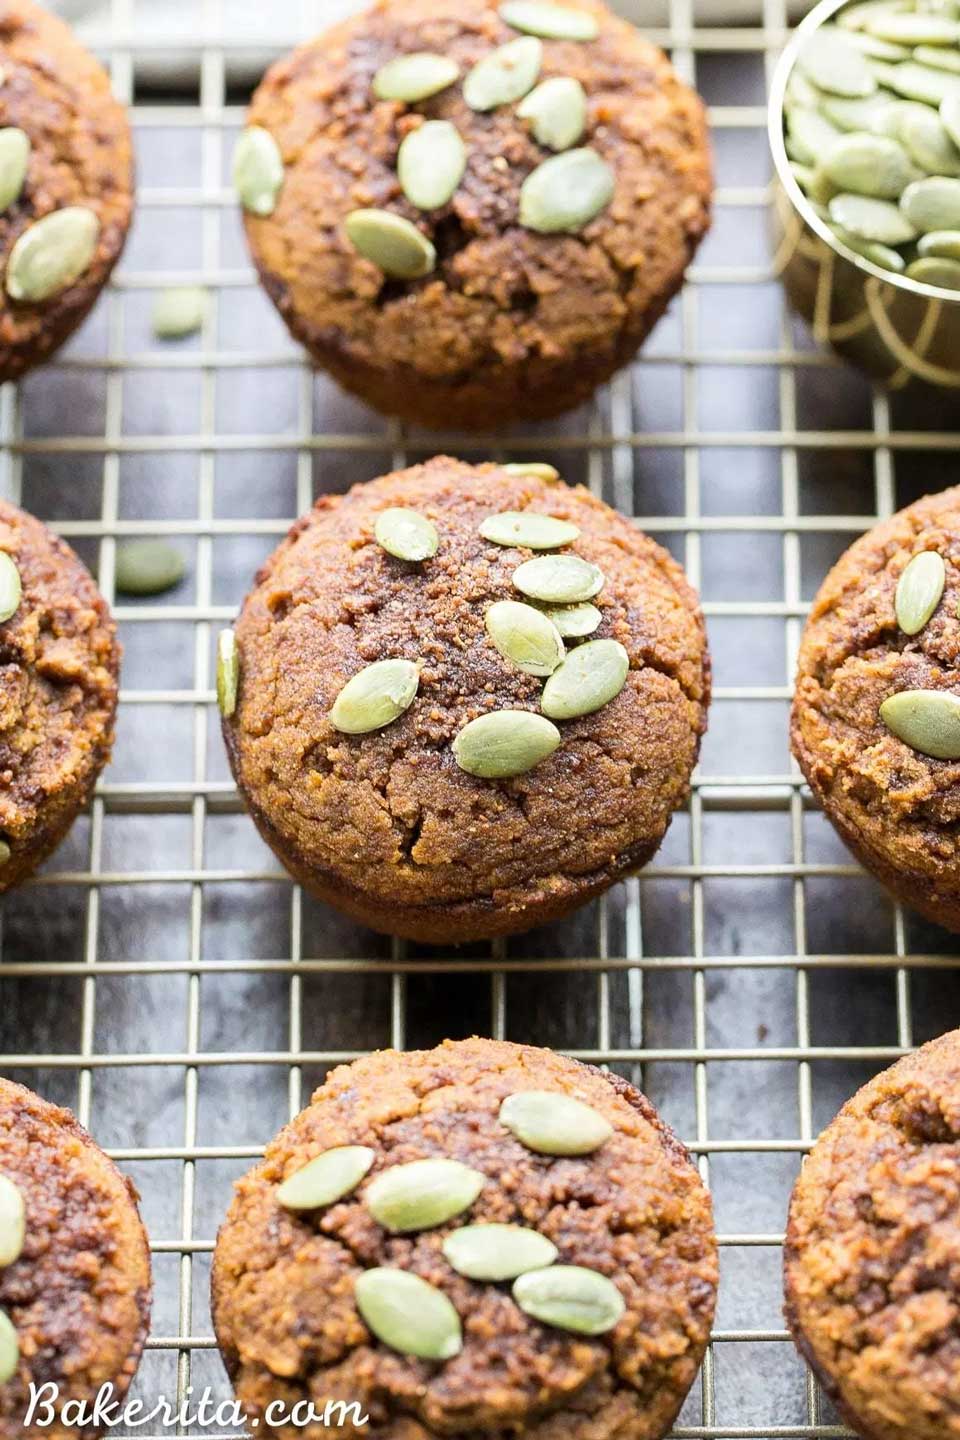 From paleo to gluten free, sugar free to whole grain! No matter what “healthy” means to you, we’ve got pumpkin muffins you’ll love! Unique flavor combos and lots of decadence … but so nutritious, too! These healthy pumpkin muffin recipes are easy to make – whip one up for quick breakfasts or healthy snacks! | pumpkin recipes | pumpkin muffins healthy | gluten free | grain free | paleo | whole wheat | refined sugar free | dairy free | #healthyrecipes #pumpkin #muffins | www.TwoHealthyKitchens.com